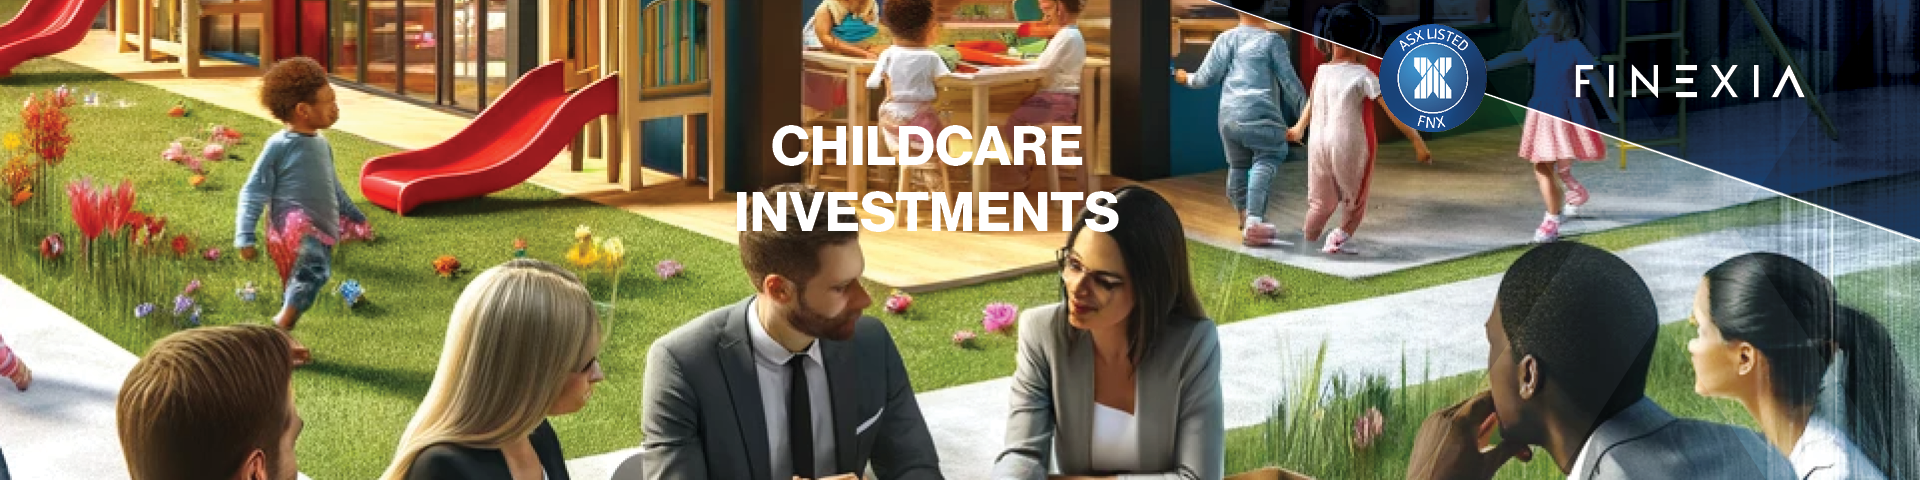 The Future of Childcare Investment: A Comprehensive Guide